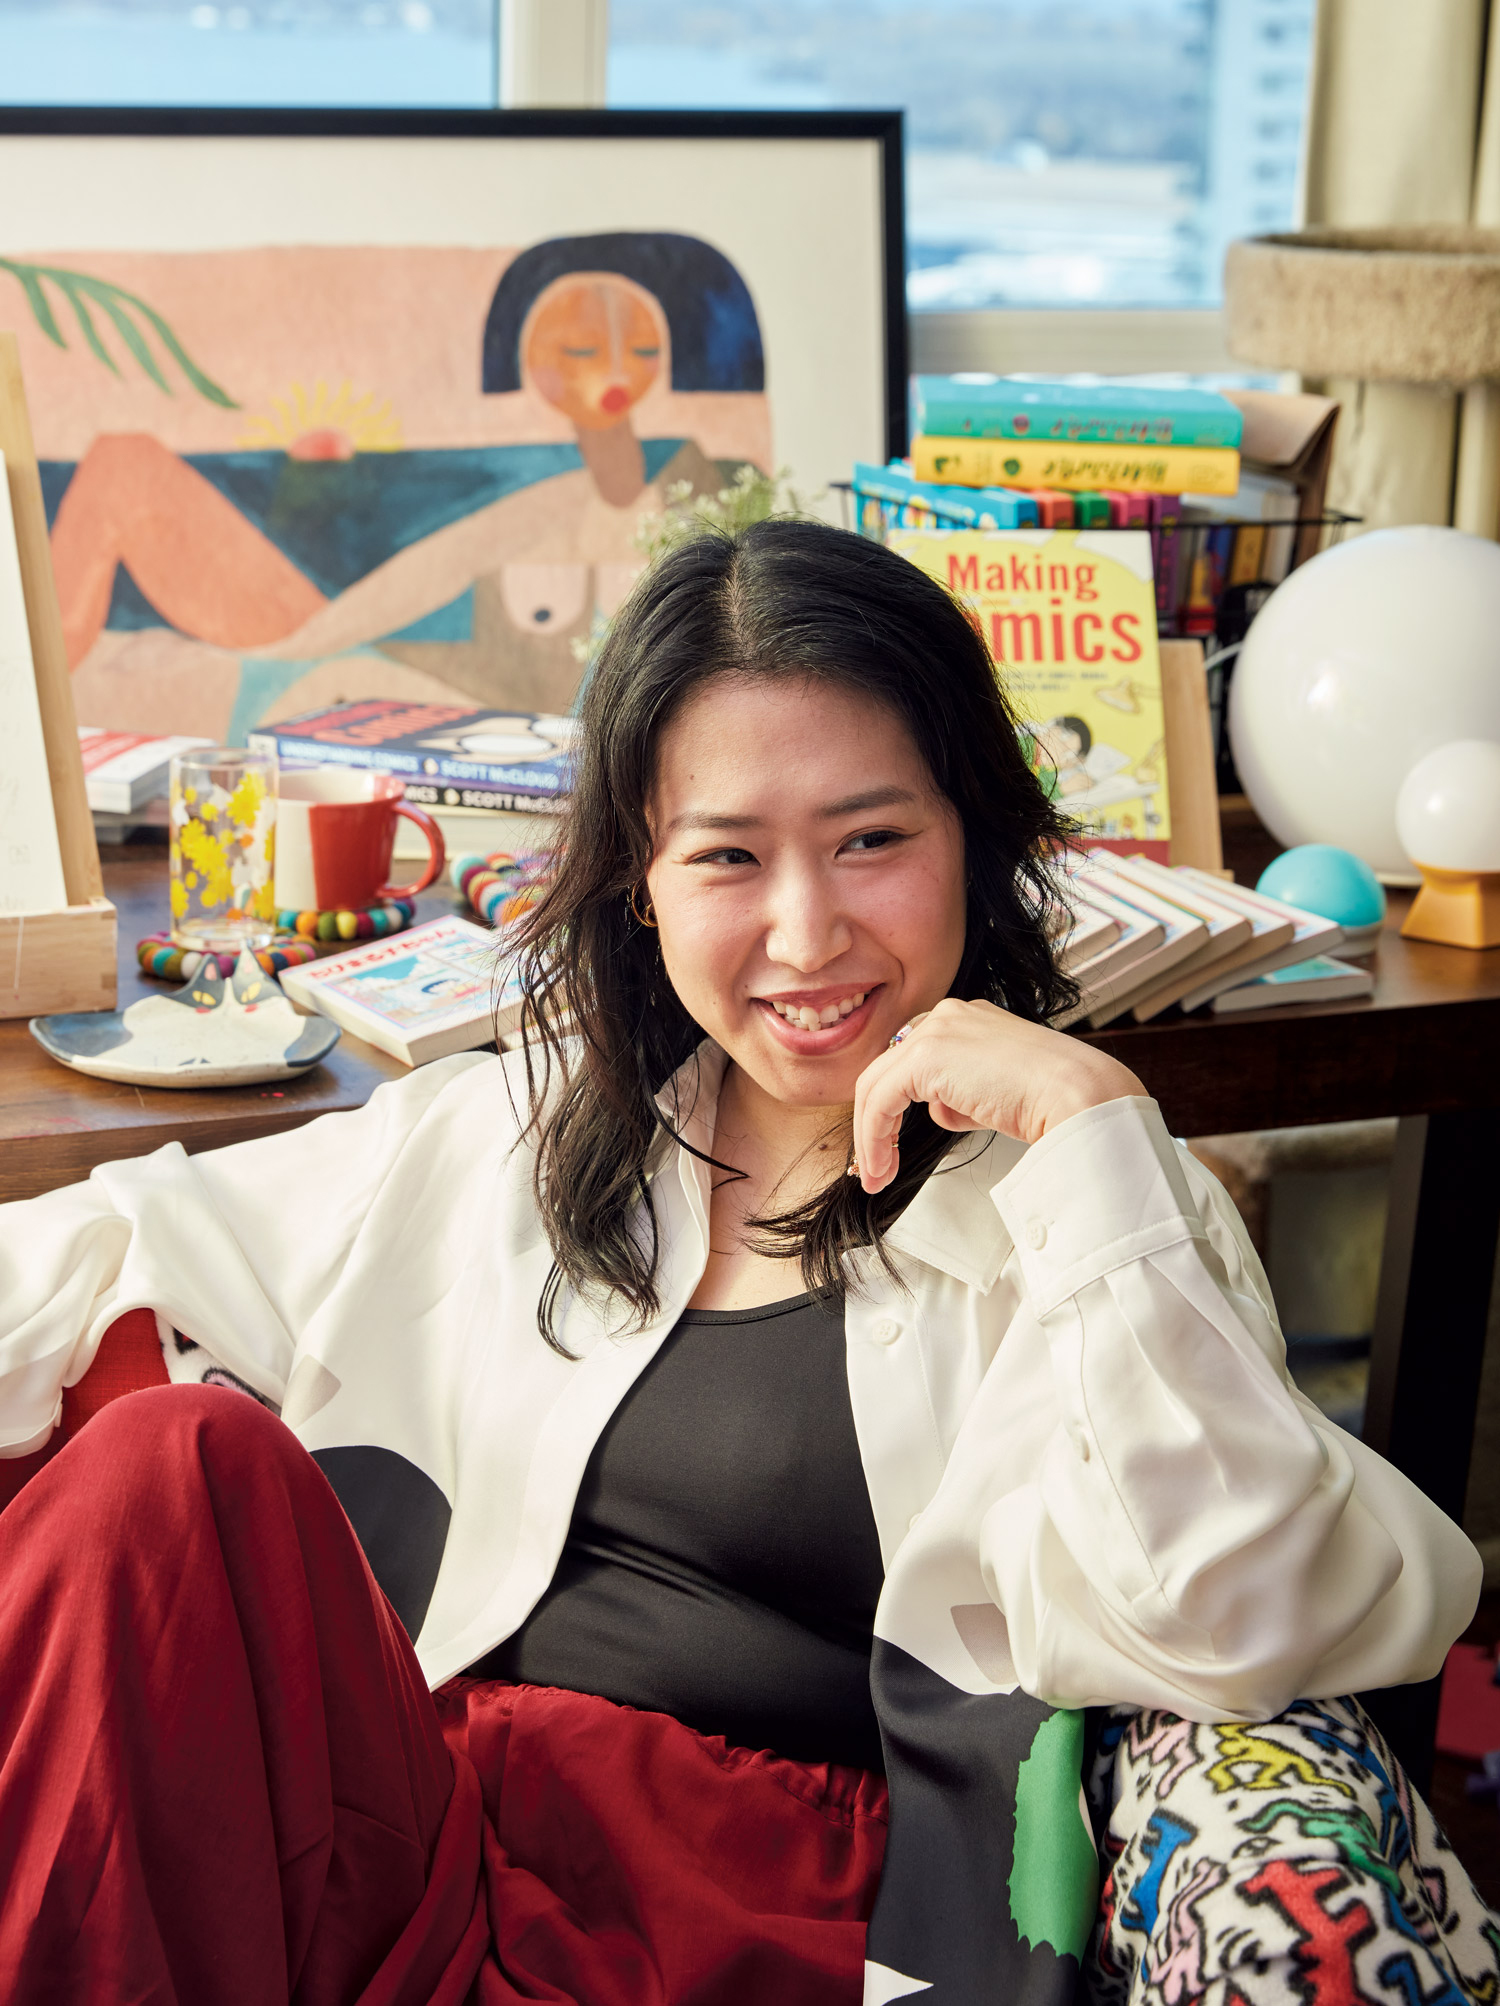 Linguistics professor Ai Taniguchi, sitting in an armchair, which is lined with a Keith Haring throw blanket. Behind her is a table full of books and a framed artwork.